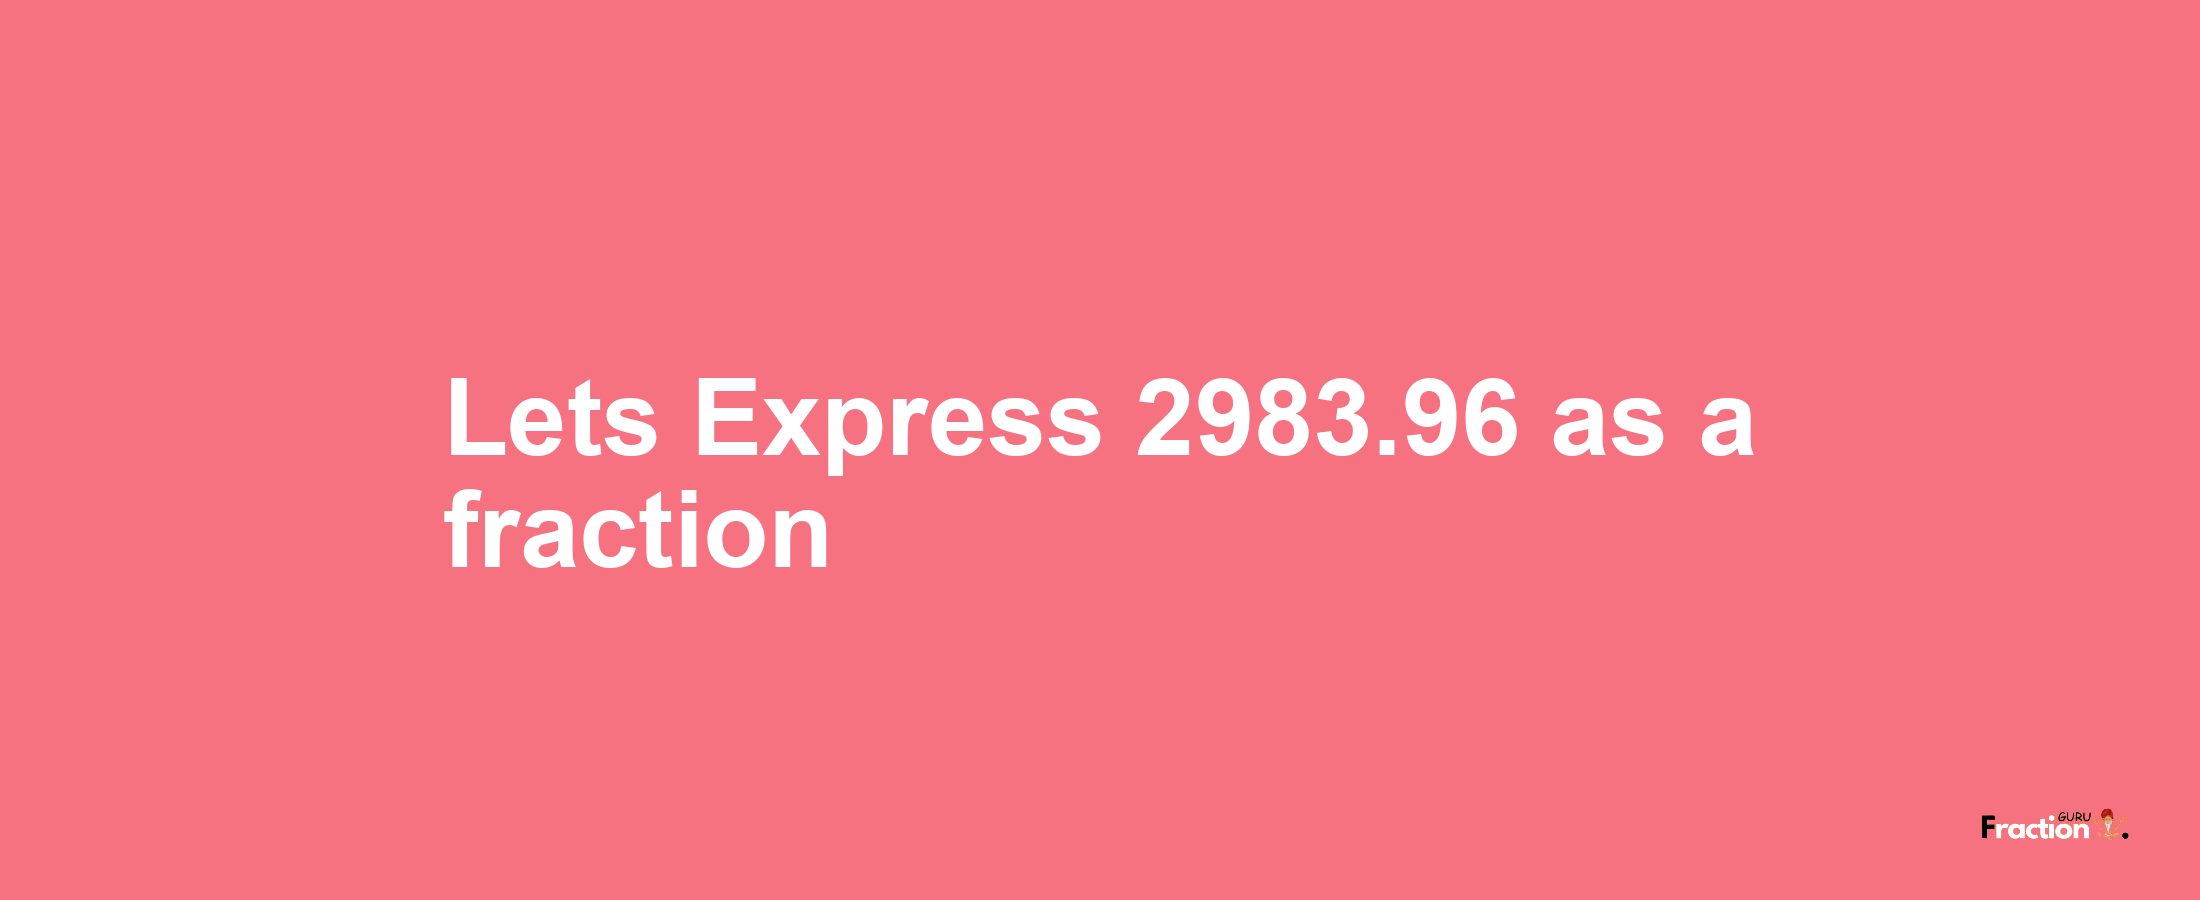 Lets Express 2983.96 as afraction